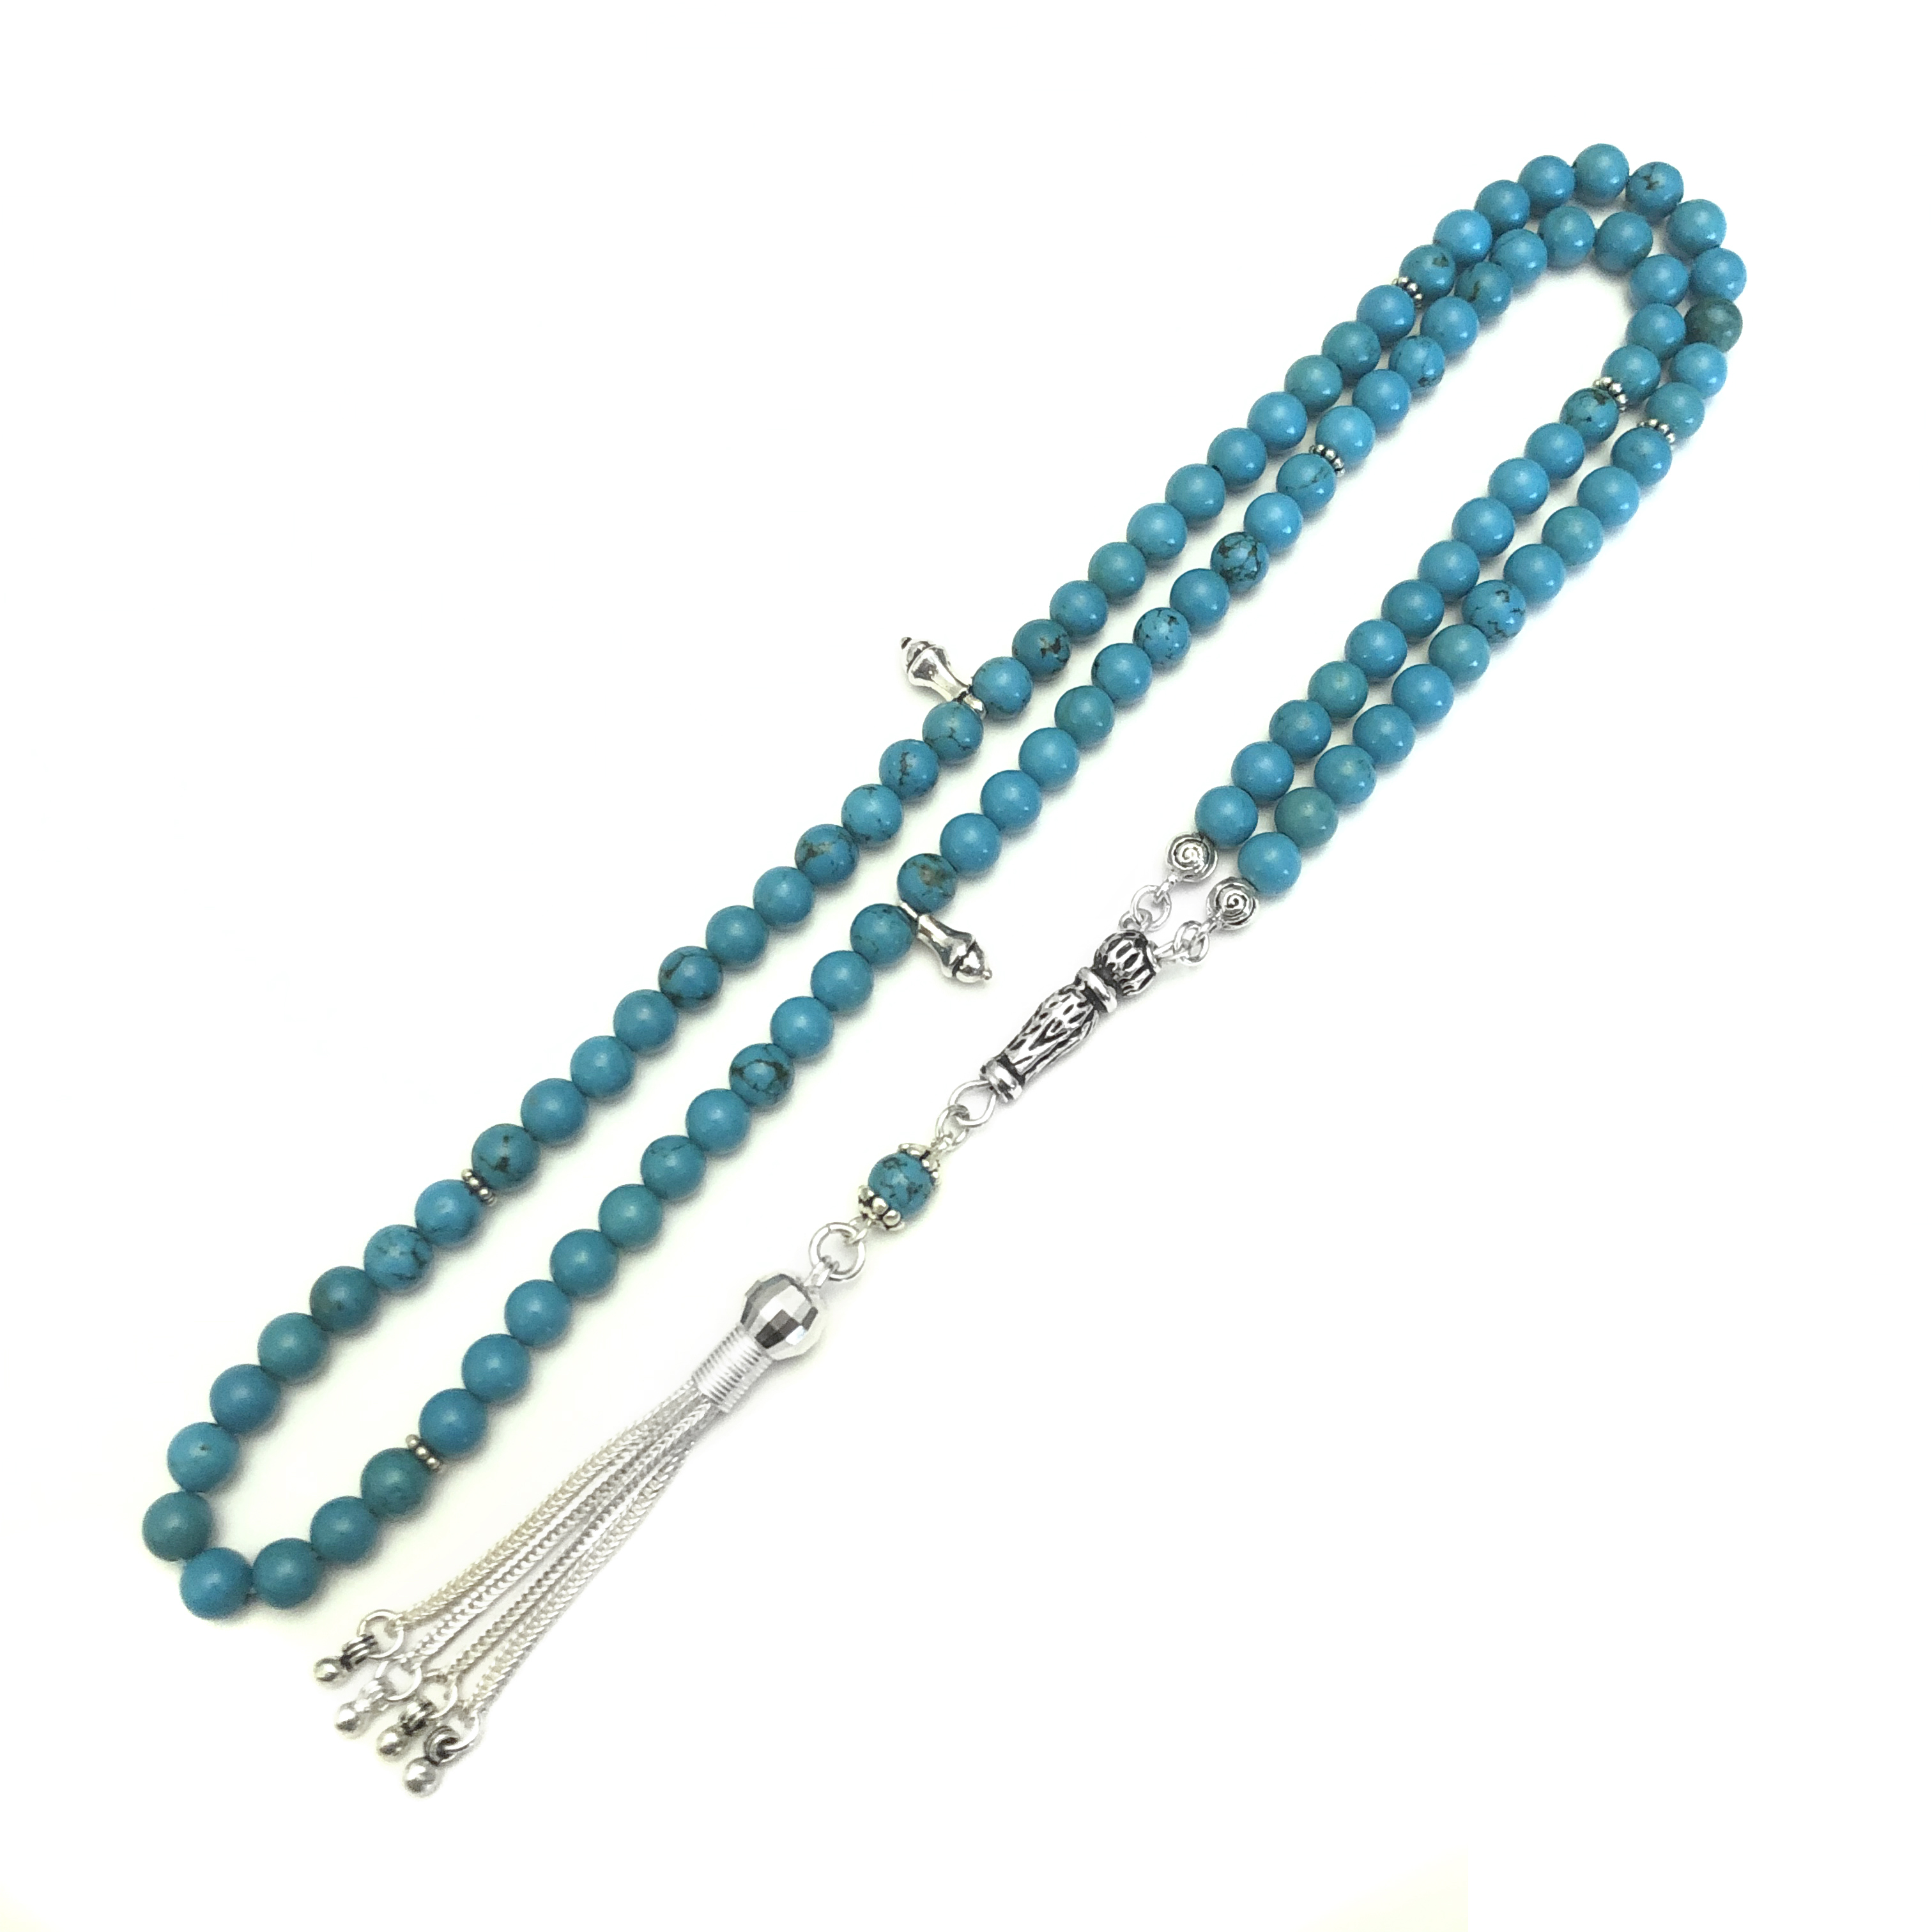 Islamic Prayer Beads 99 Howlite Tasbih sterling silver ID # 6790 - Click Image to Close